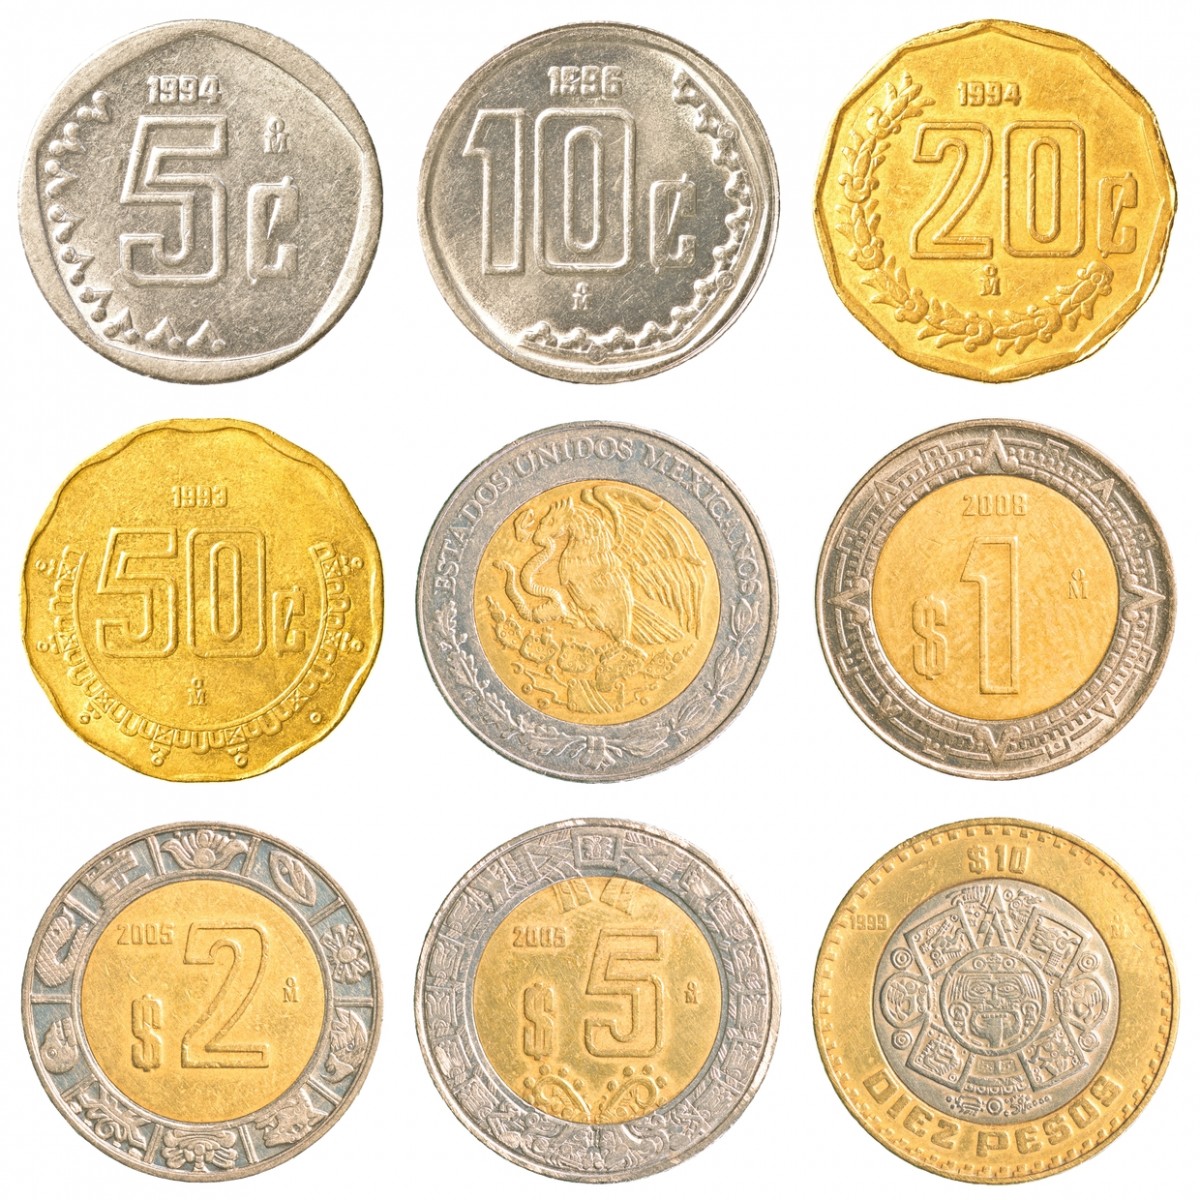 Coins in circulation in Mexico